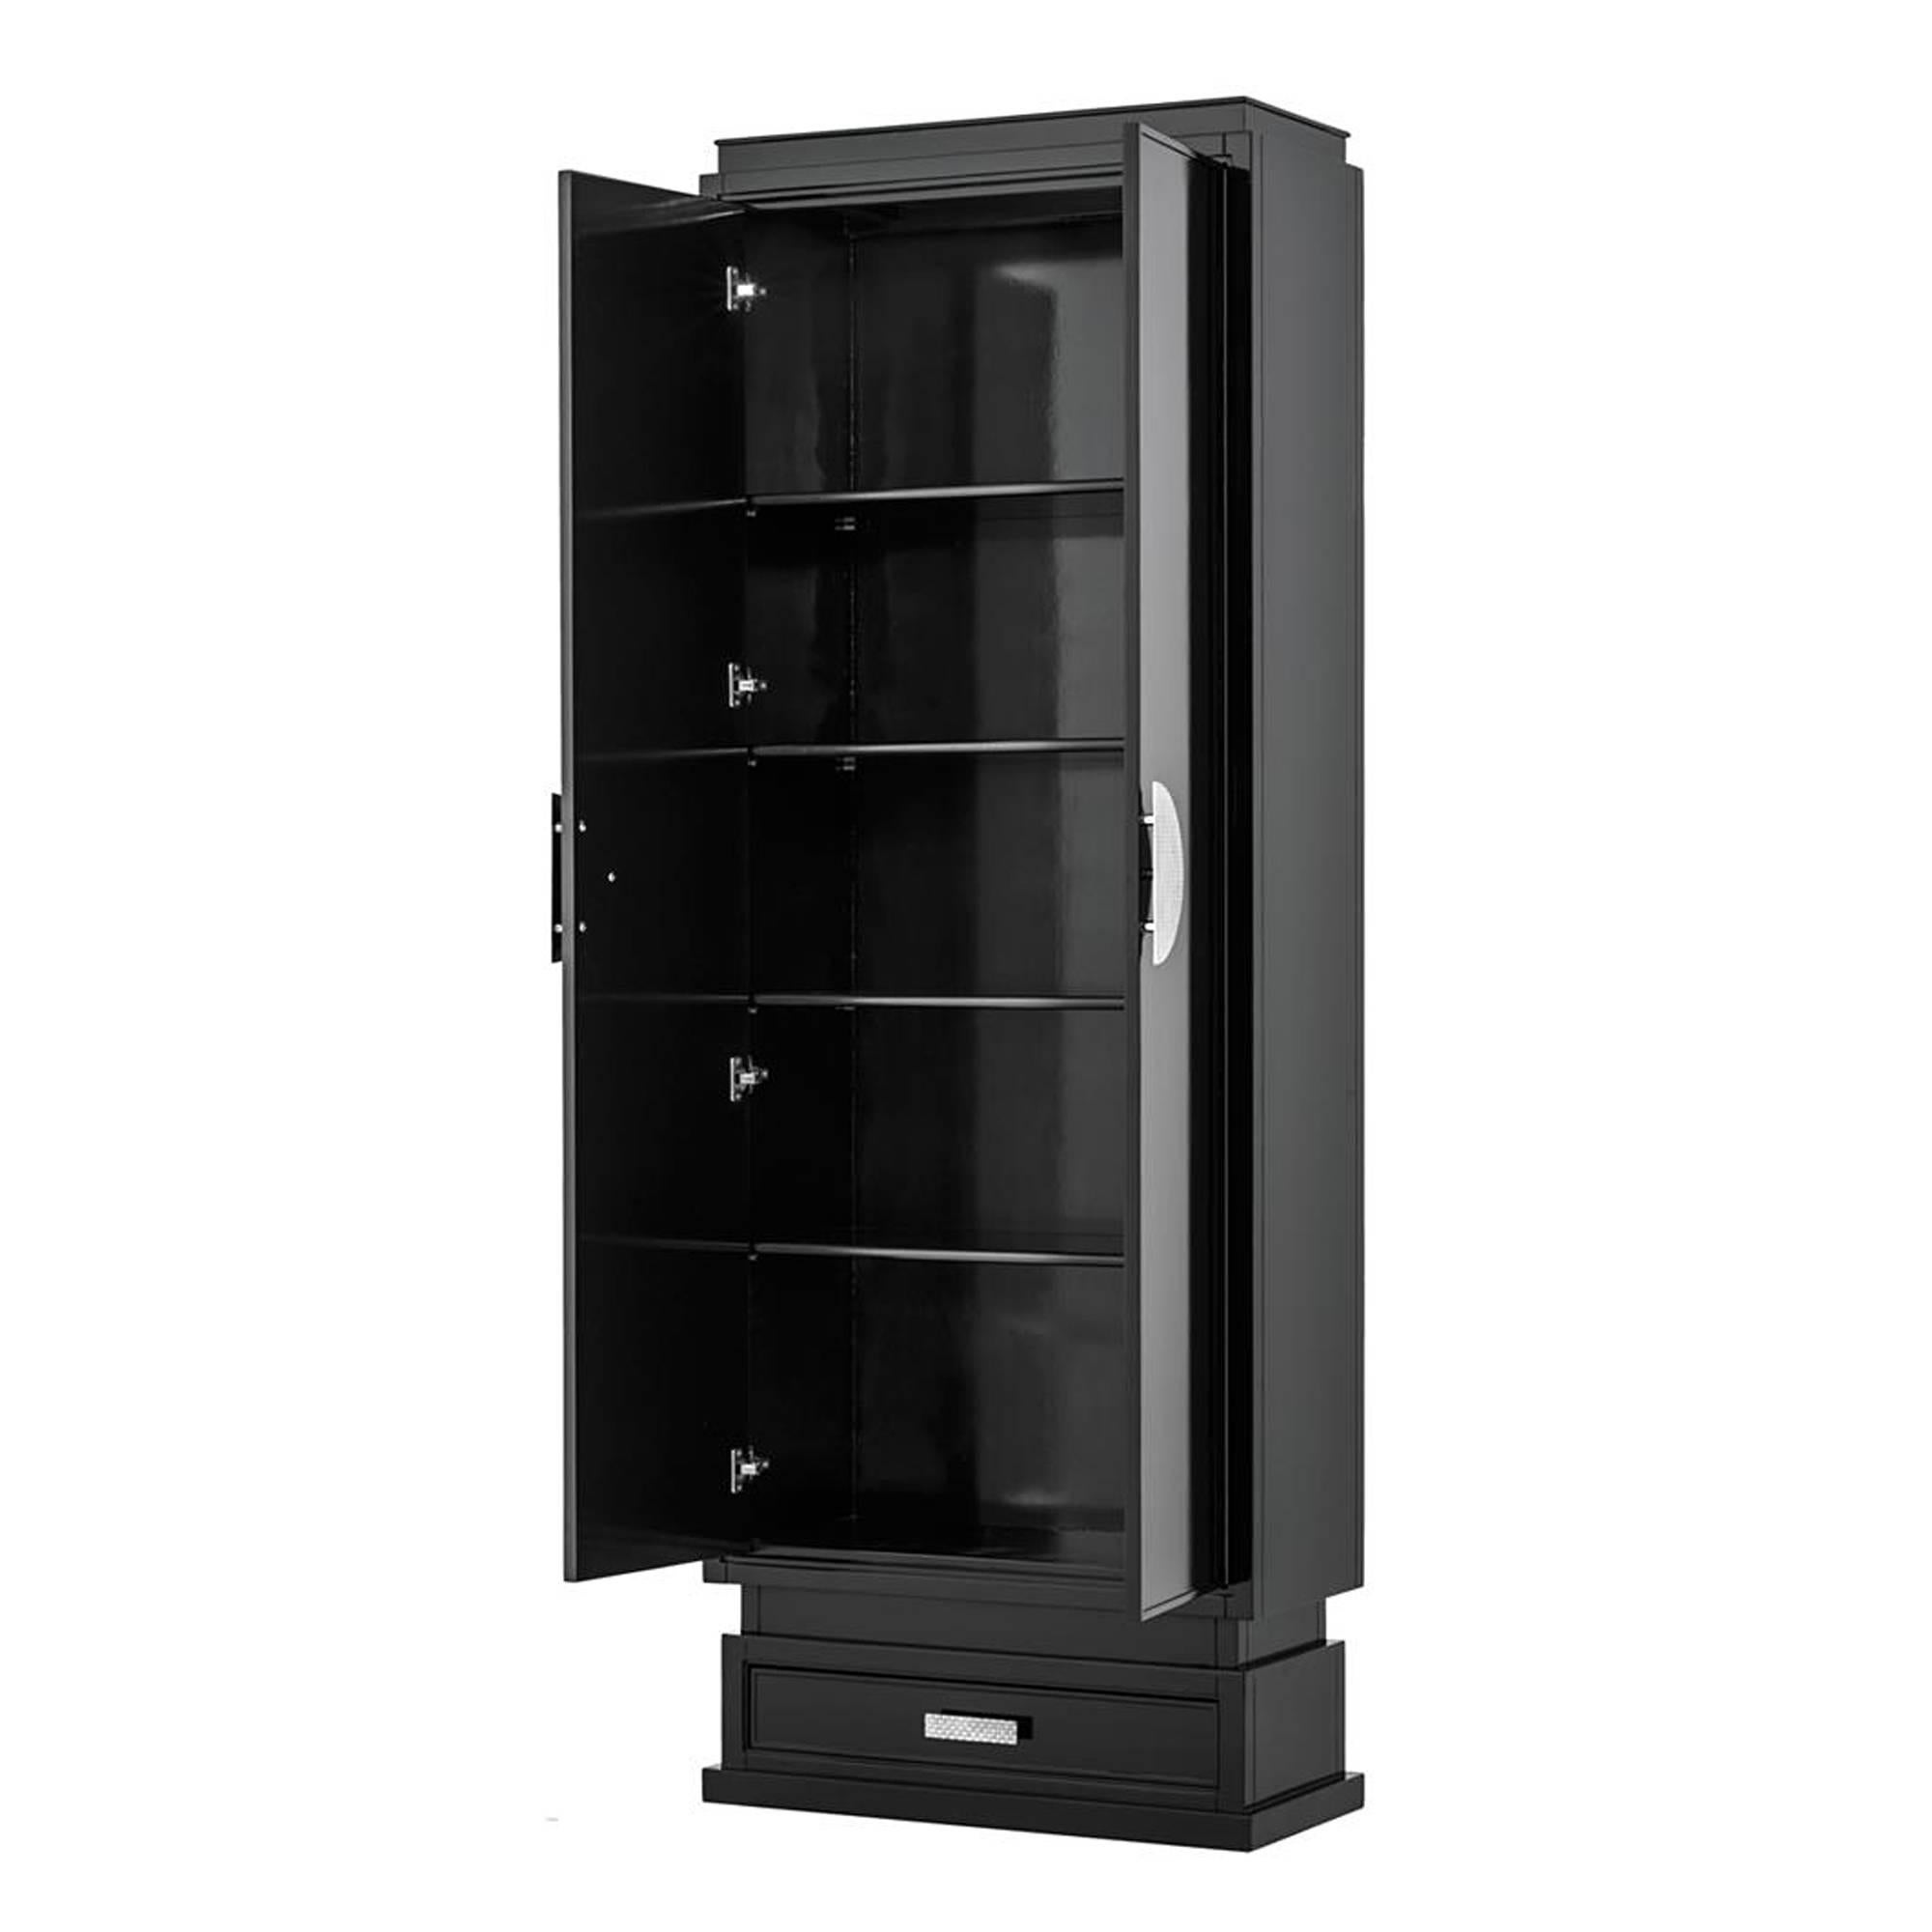 Cabinet or wardrobe Tokyo black made in
birchwood with black paint finish. Details in
Nickel finishes. Elegant and designed piece.
